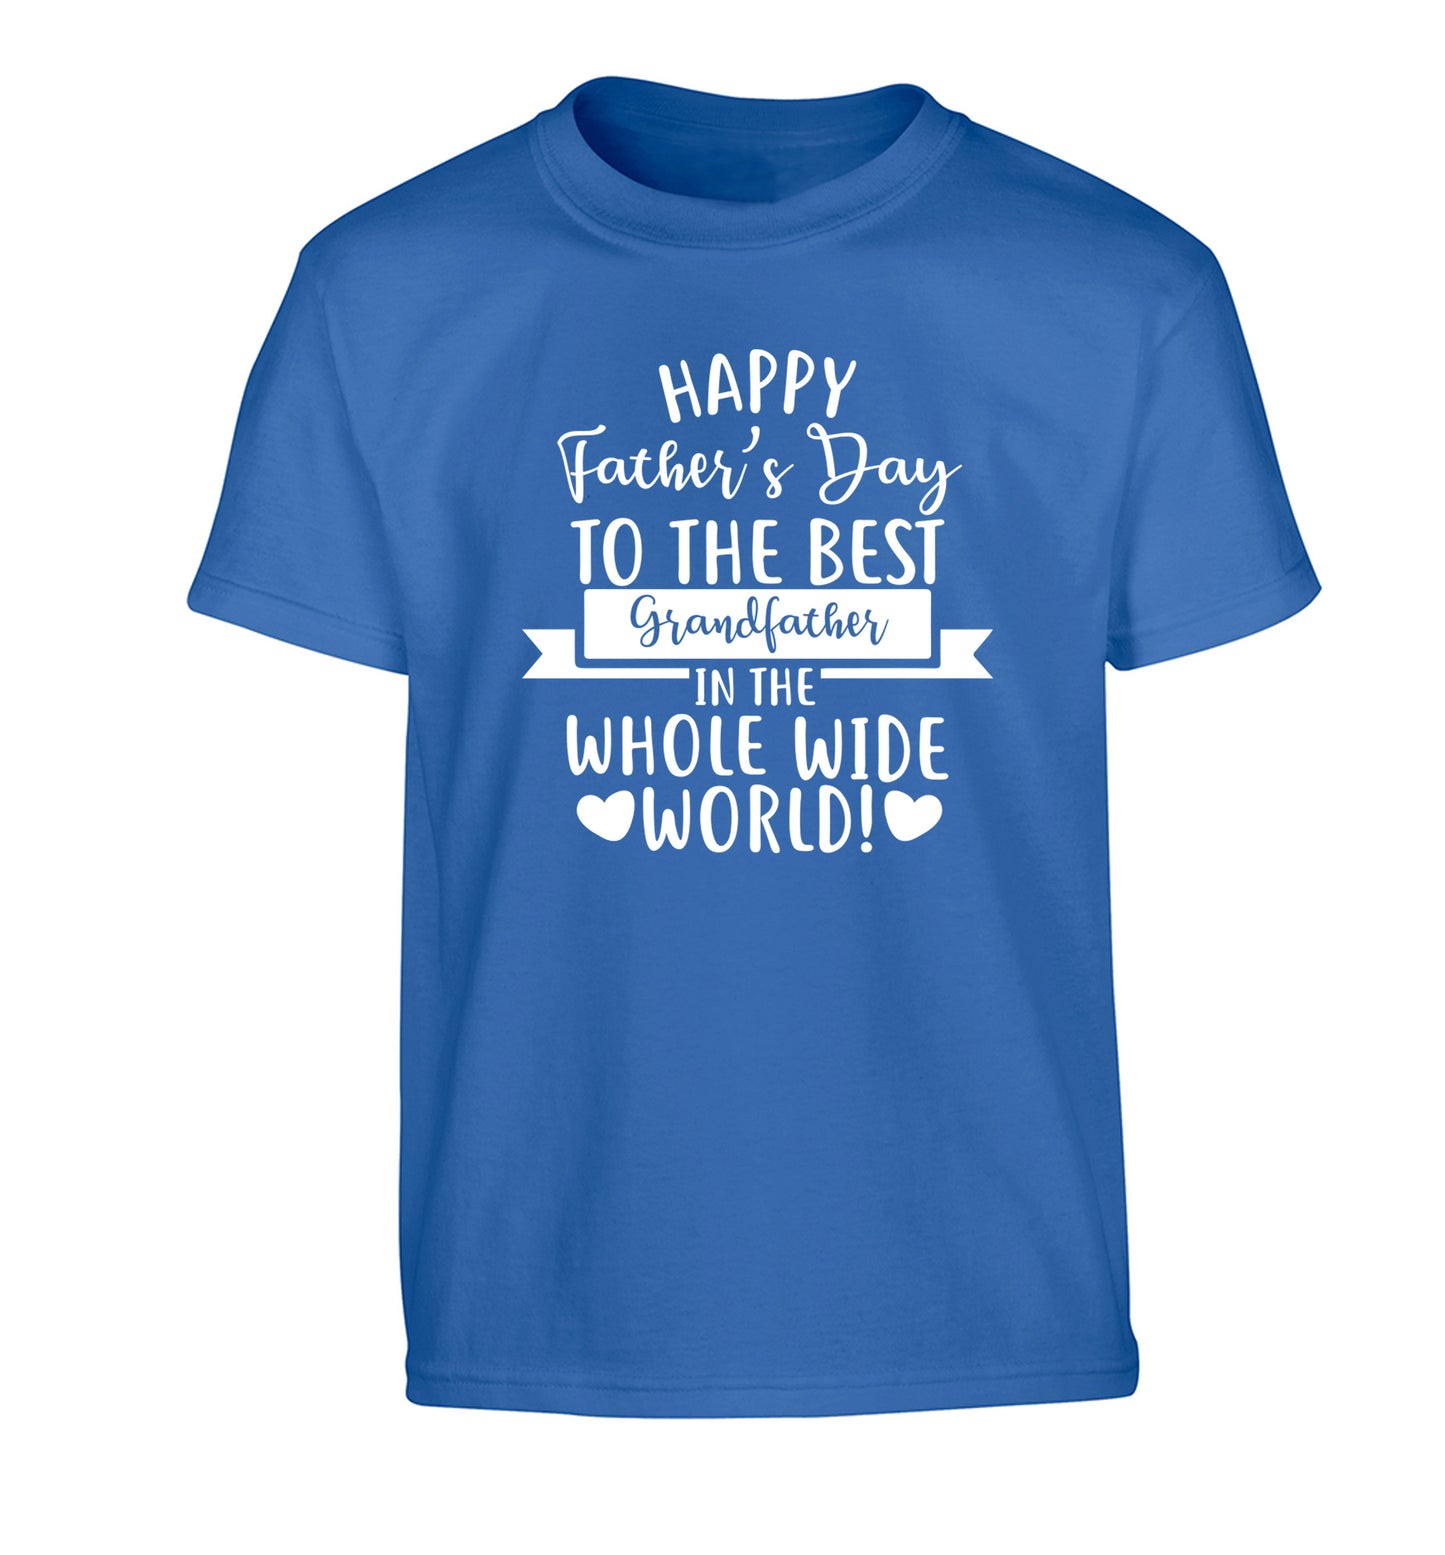 Happy Father's Day to the best grandfather in the world Children's blue Tshirt 12-13 Years